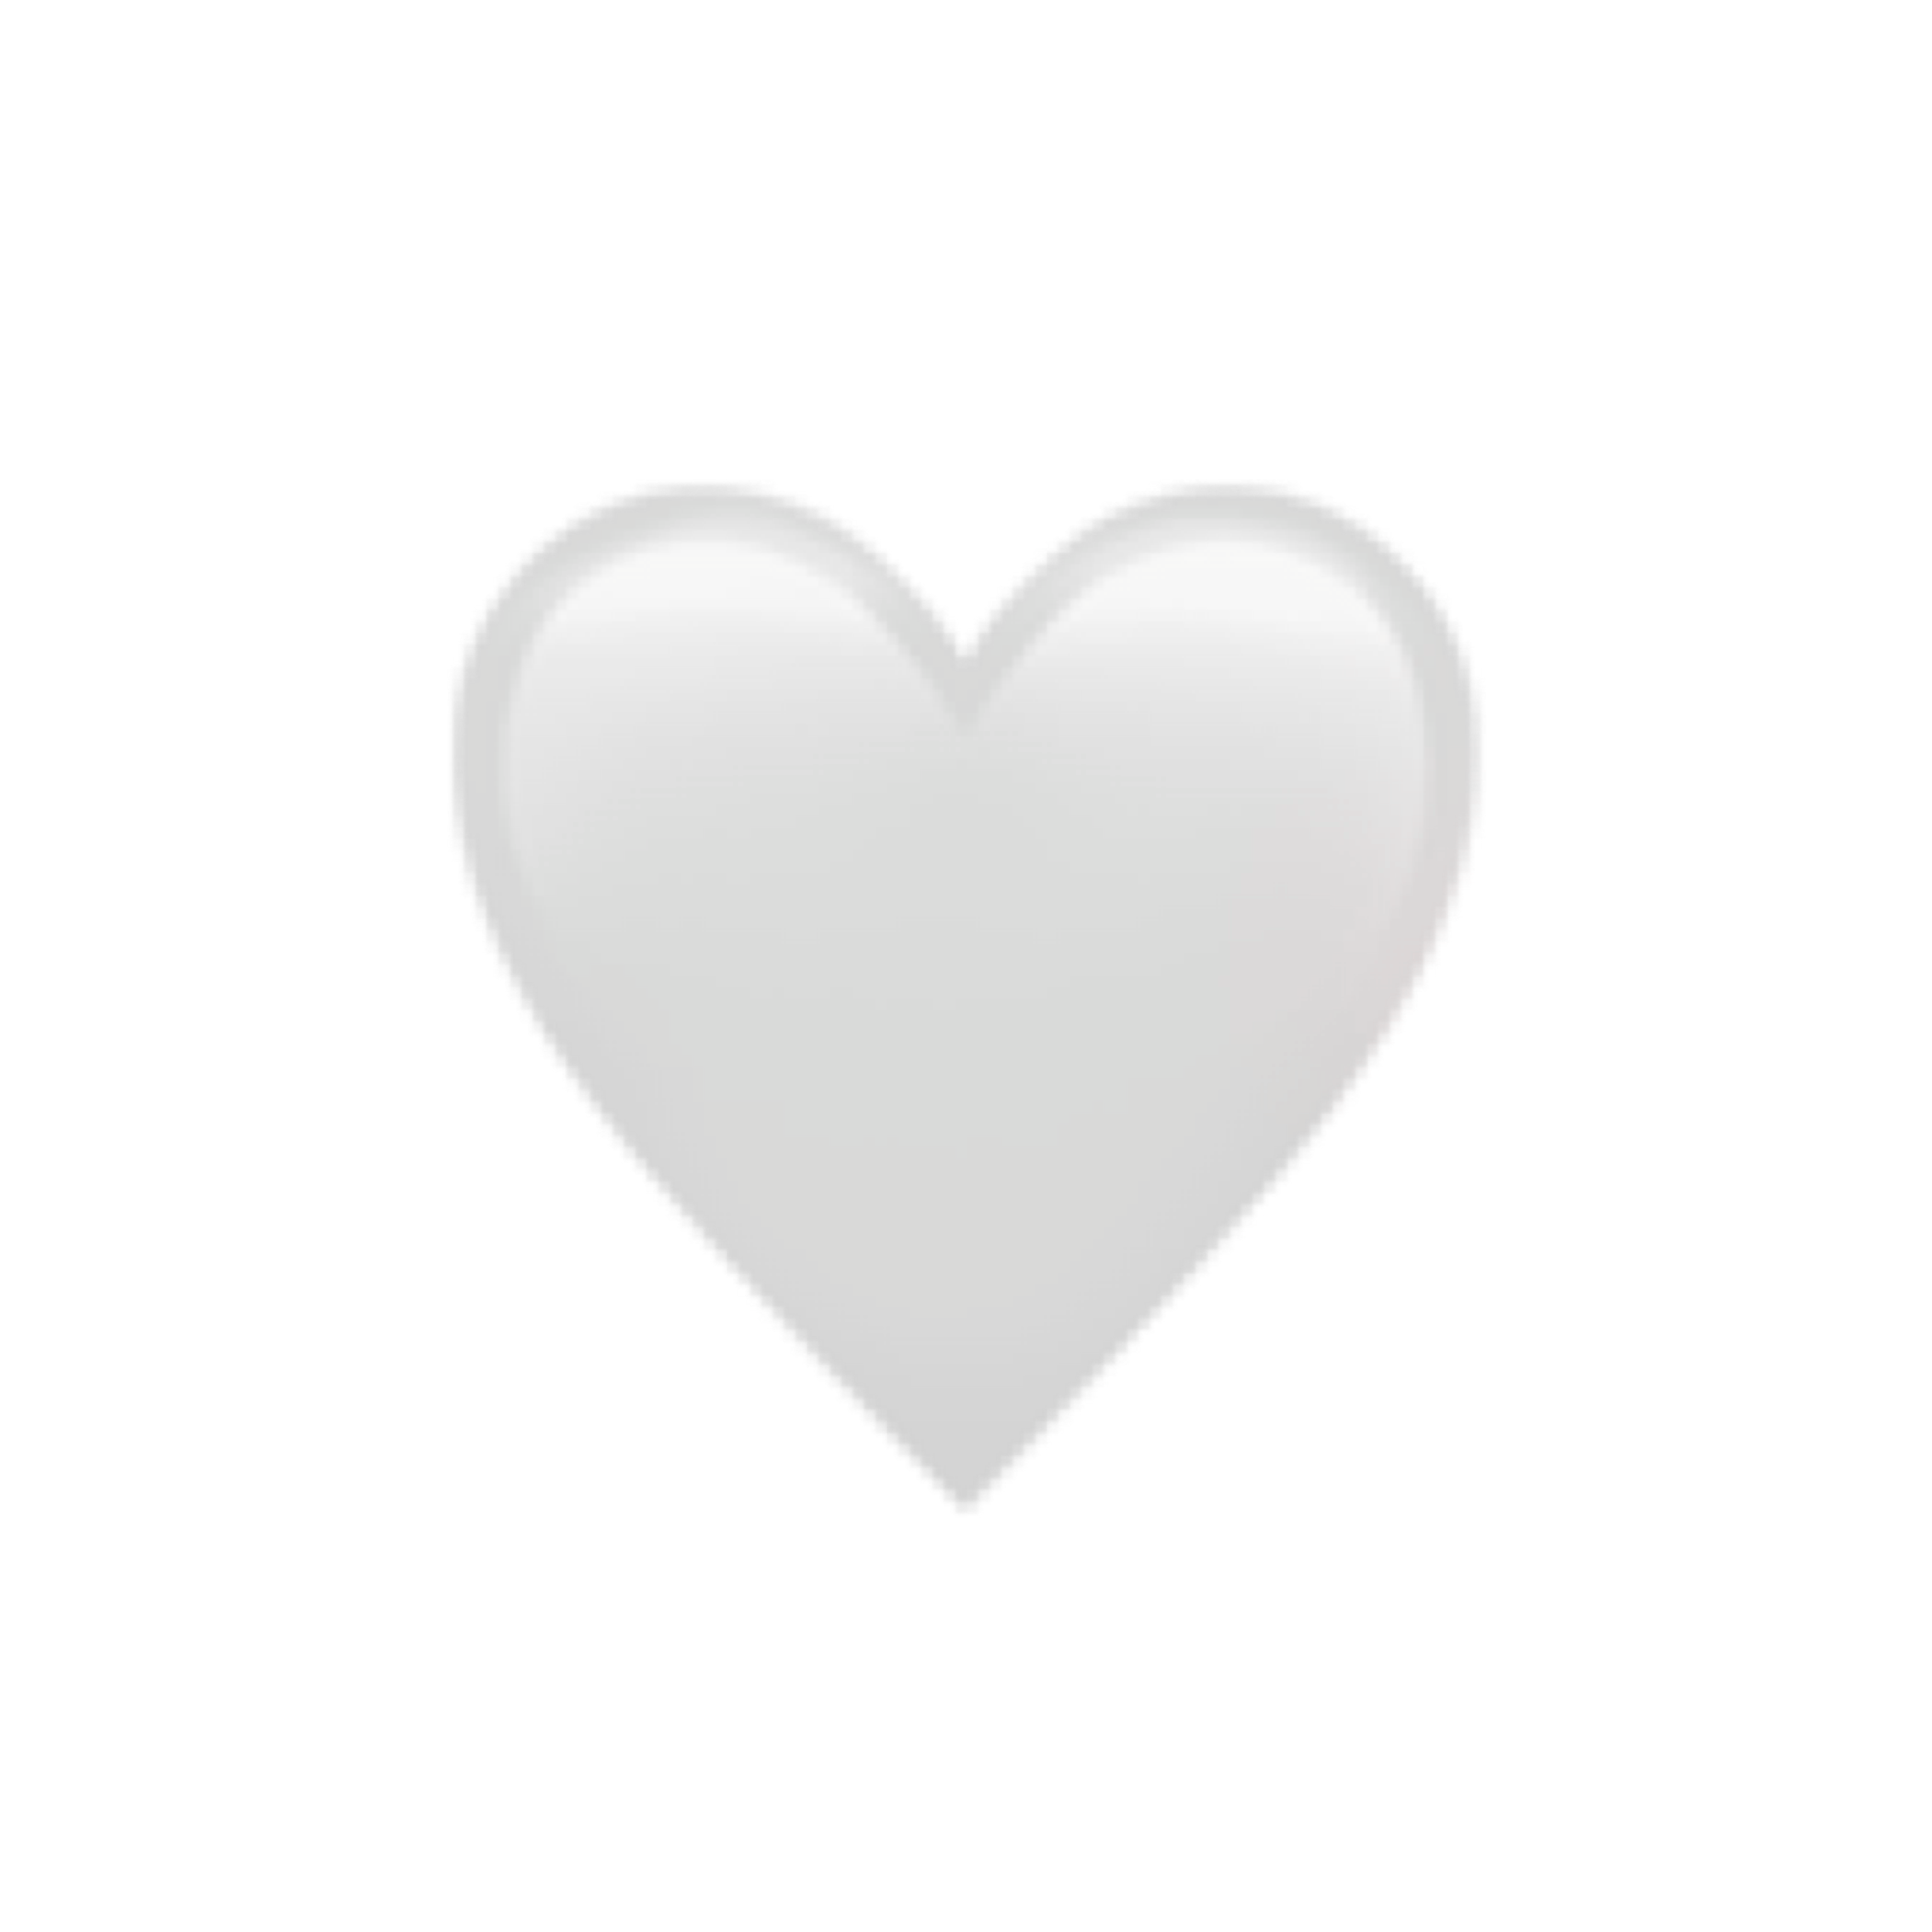 List 101+ Images how to get white heart emoji on iphone Full HD, 2k, 4k